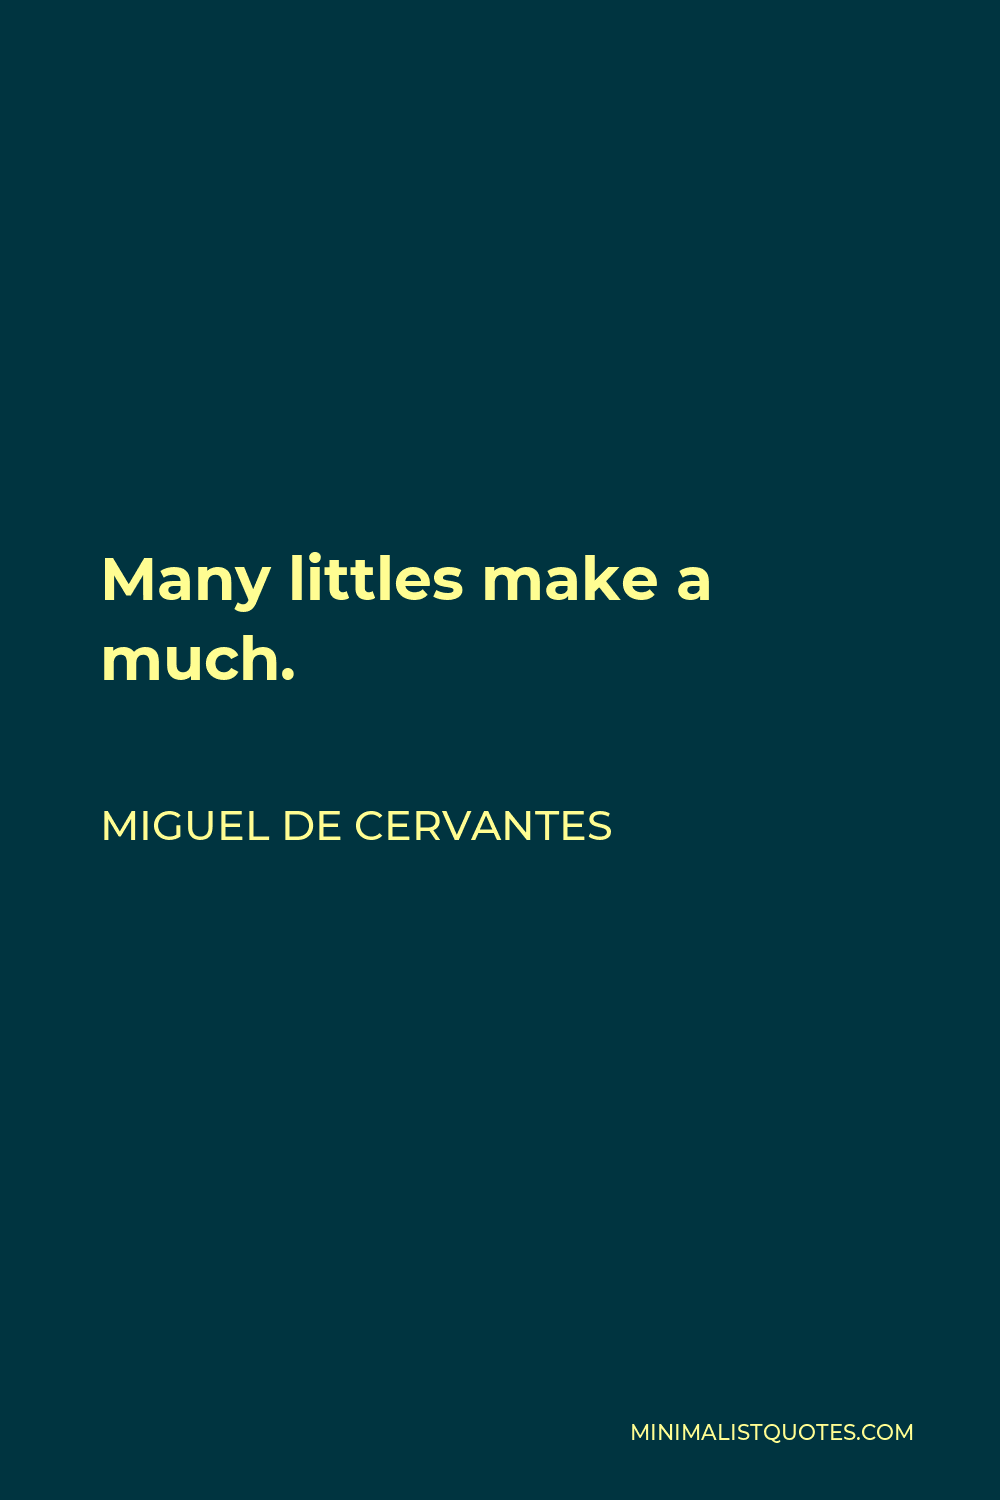 Miguel de Cervantes Quote - Many littles make a much.